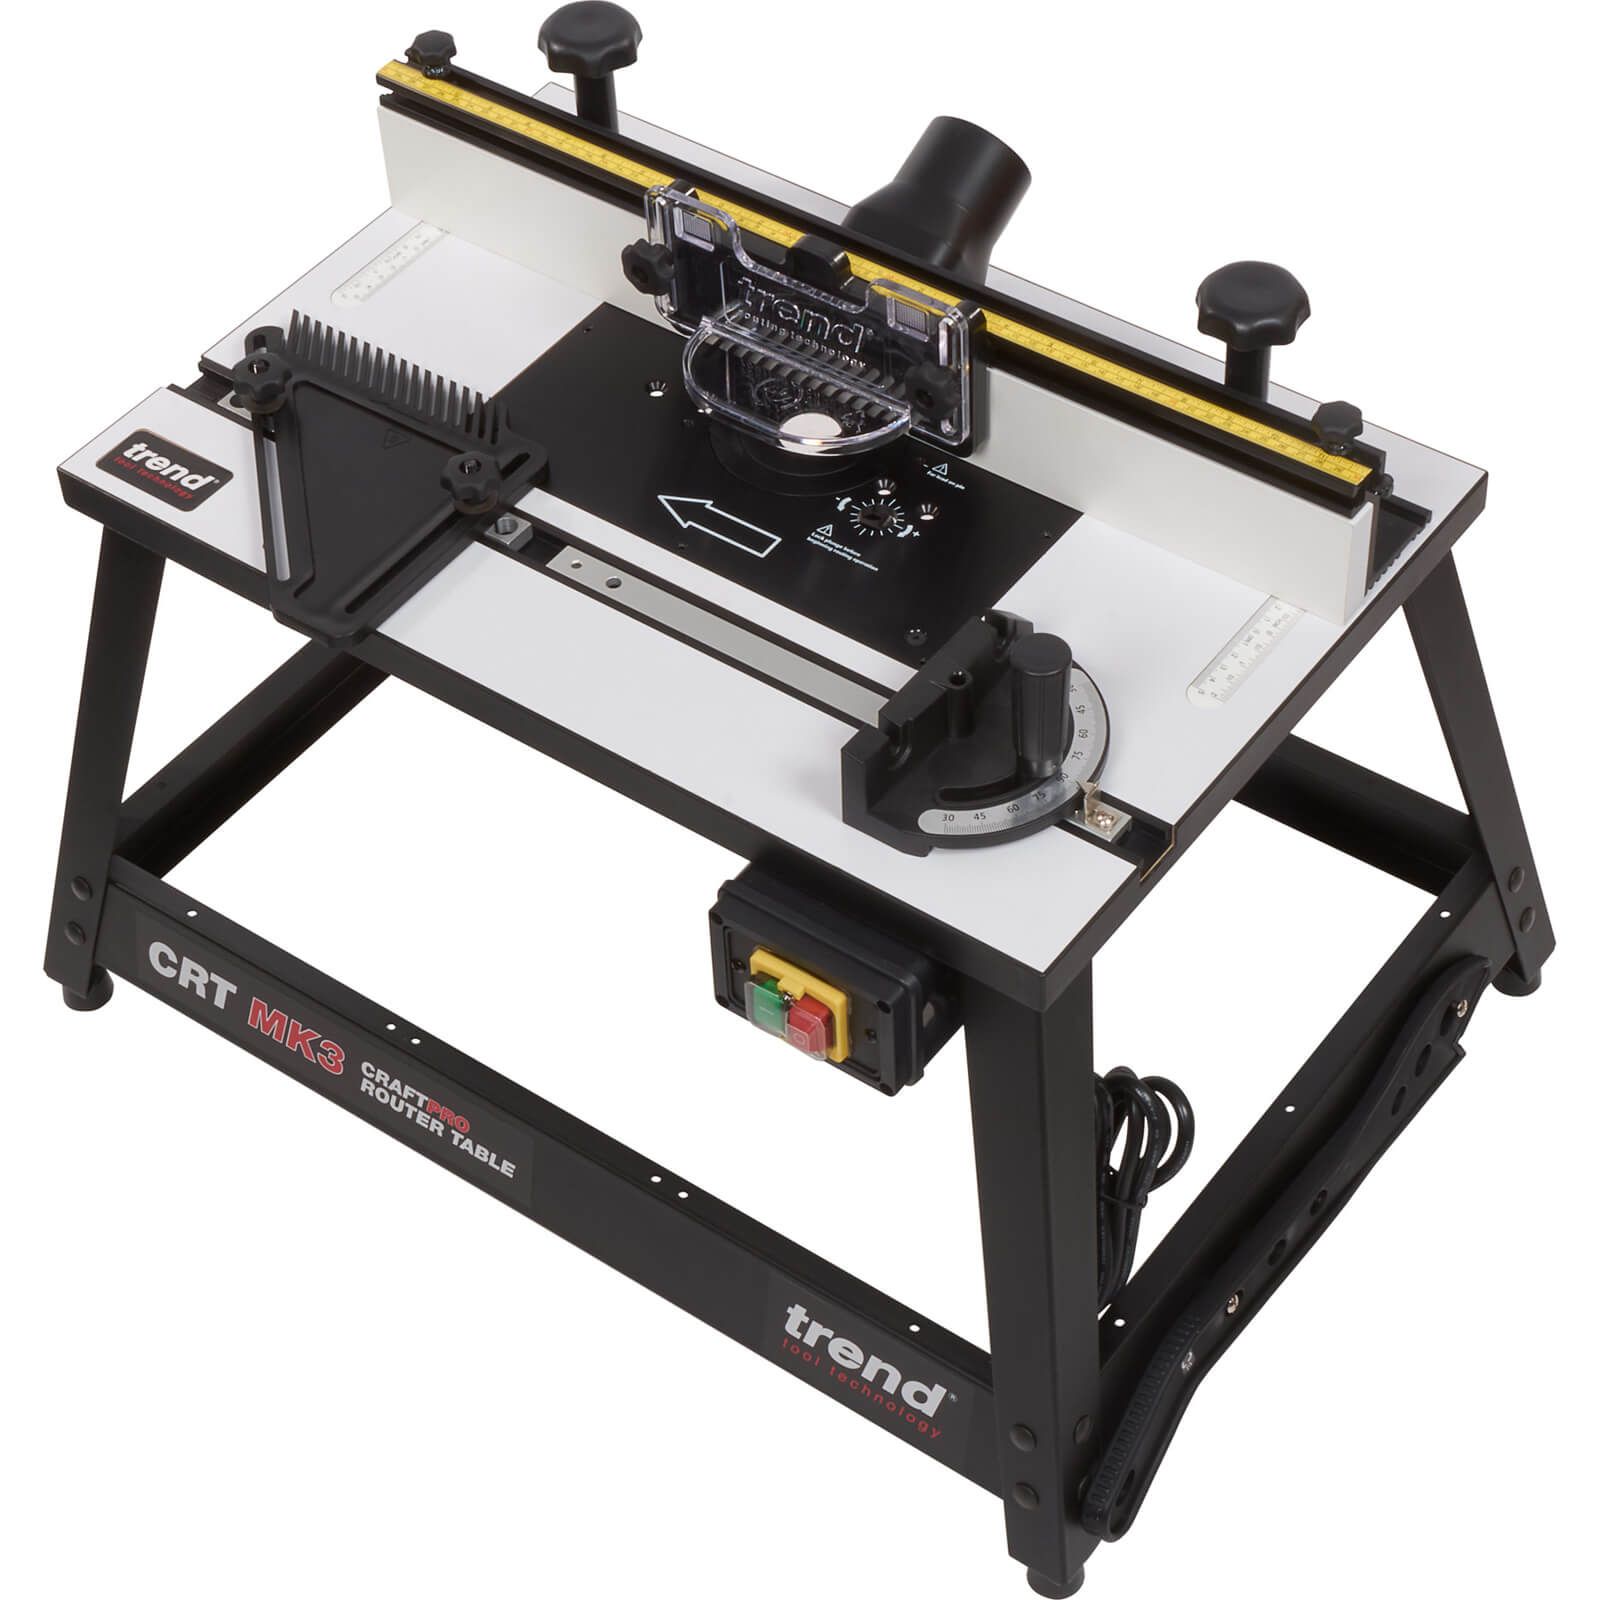 Image of Trend CRAFTPRO Mk3 Router Table 240v